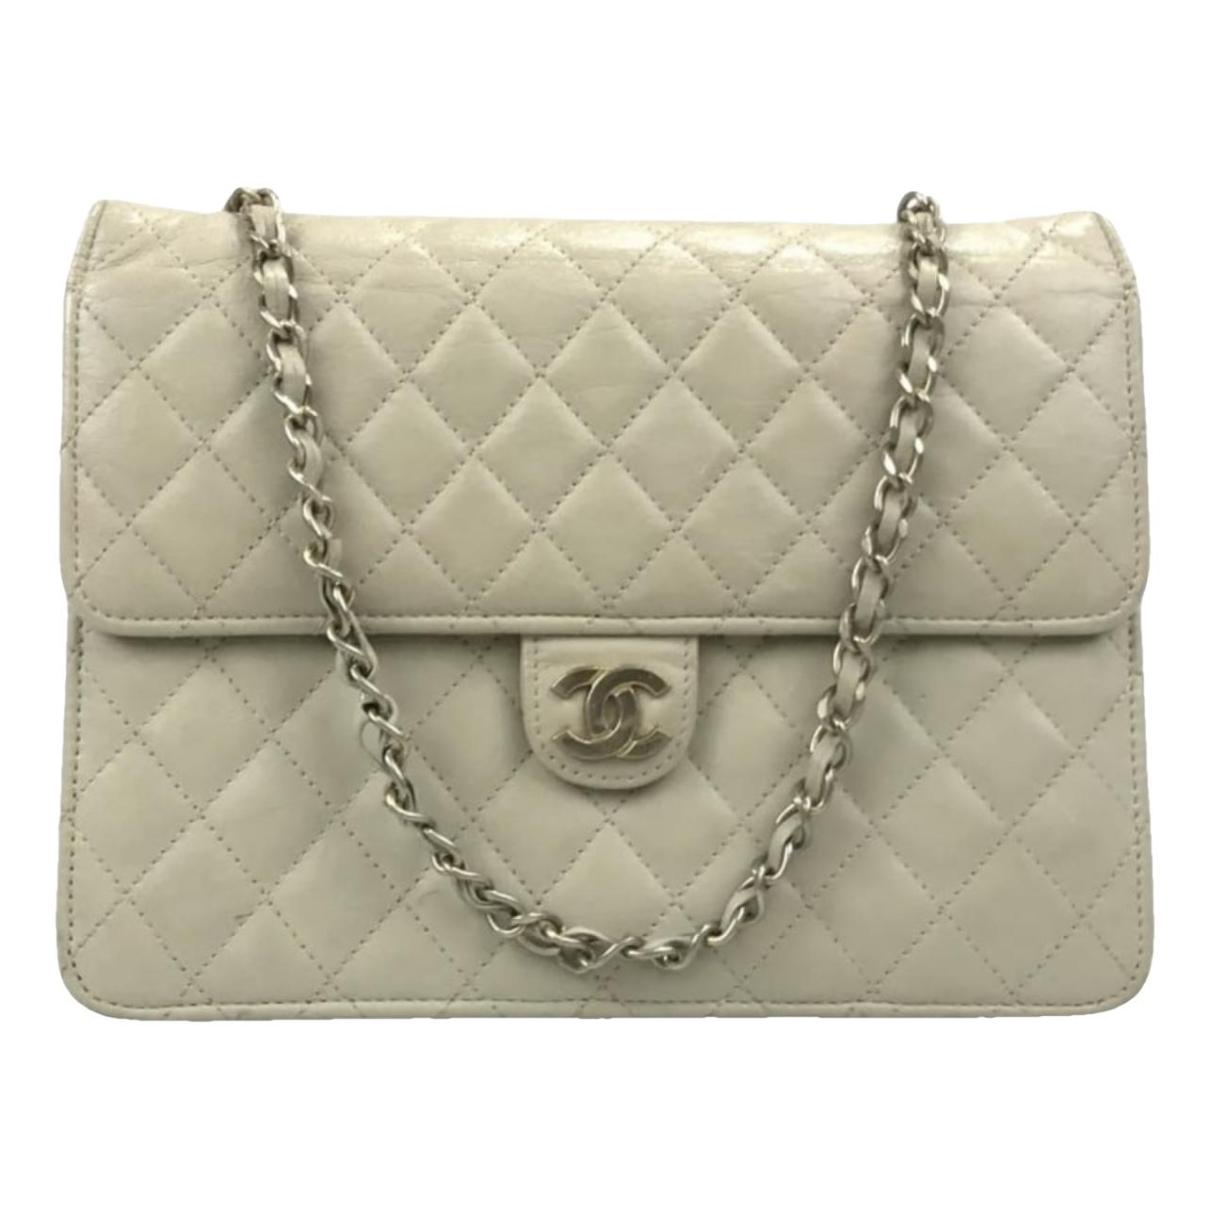 Timeless/classique leather crossbody bag Chanel White in Leather - 38784304